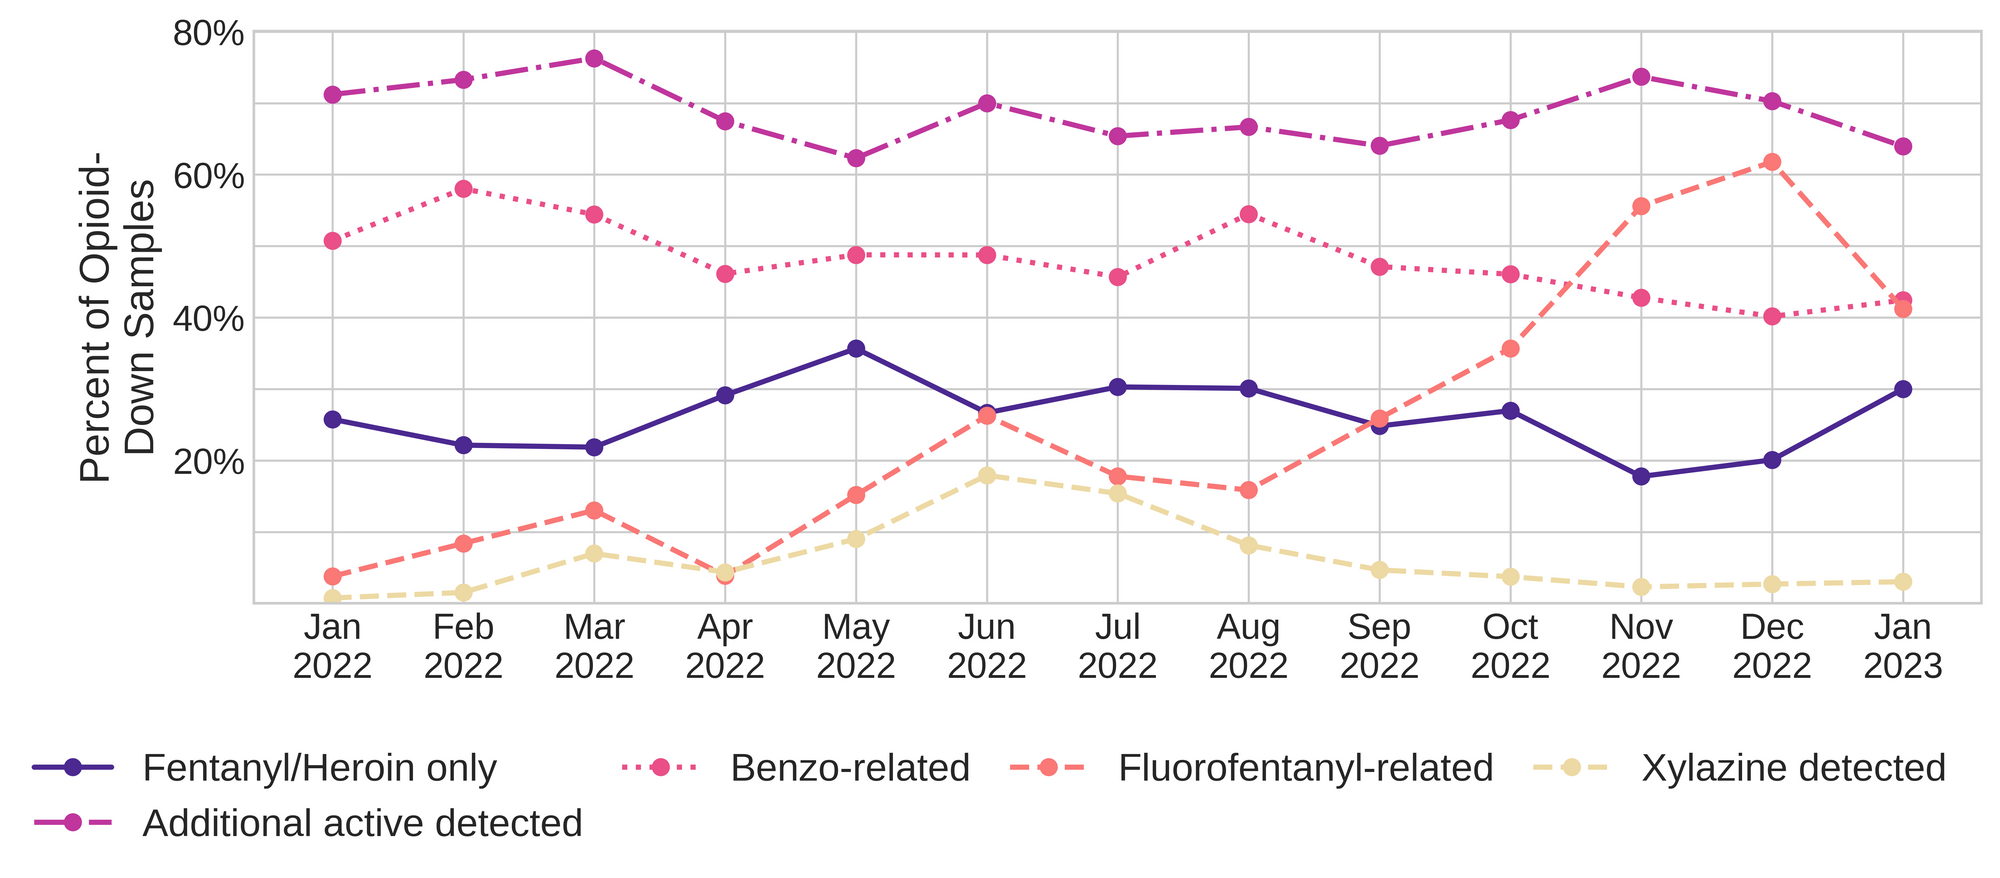 Figure 3. The percentage of expected opioid-down samples checked between January 2022 and January 2023 that only contained fentanyl/heroin actives (solid dark purple), opioid-down samples with an additional active detected (dot-dashed magenta), opioid-down samples that contained a benzodiazepine-related drug (dotted pink), opioid-down samples that contained fluorofentanyl (dashed salmon), and opioid-down samples that contained xylazine (dashed yellow).